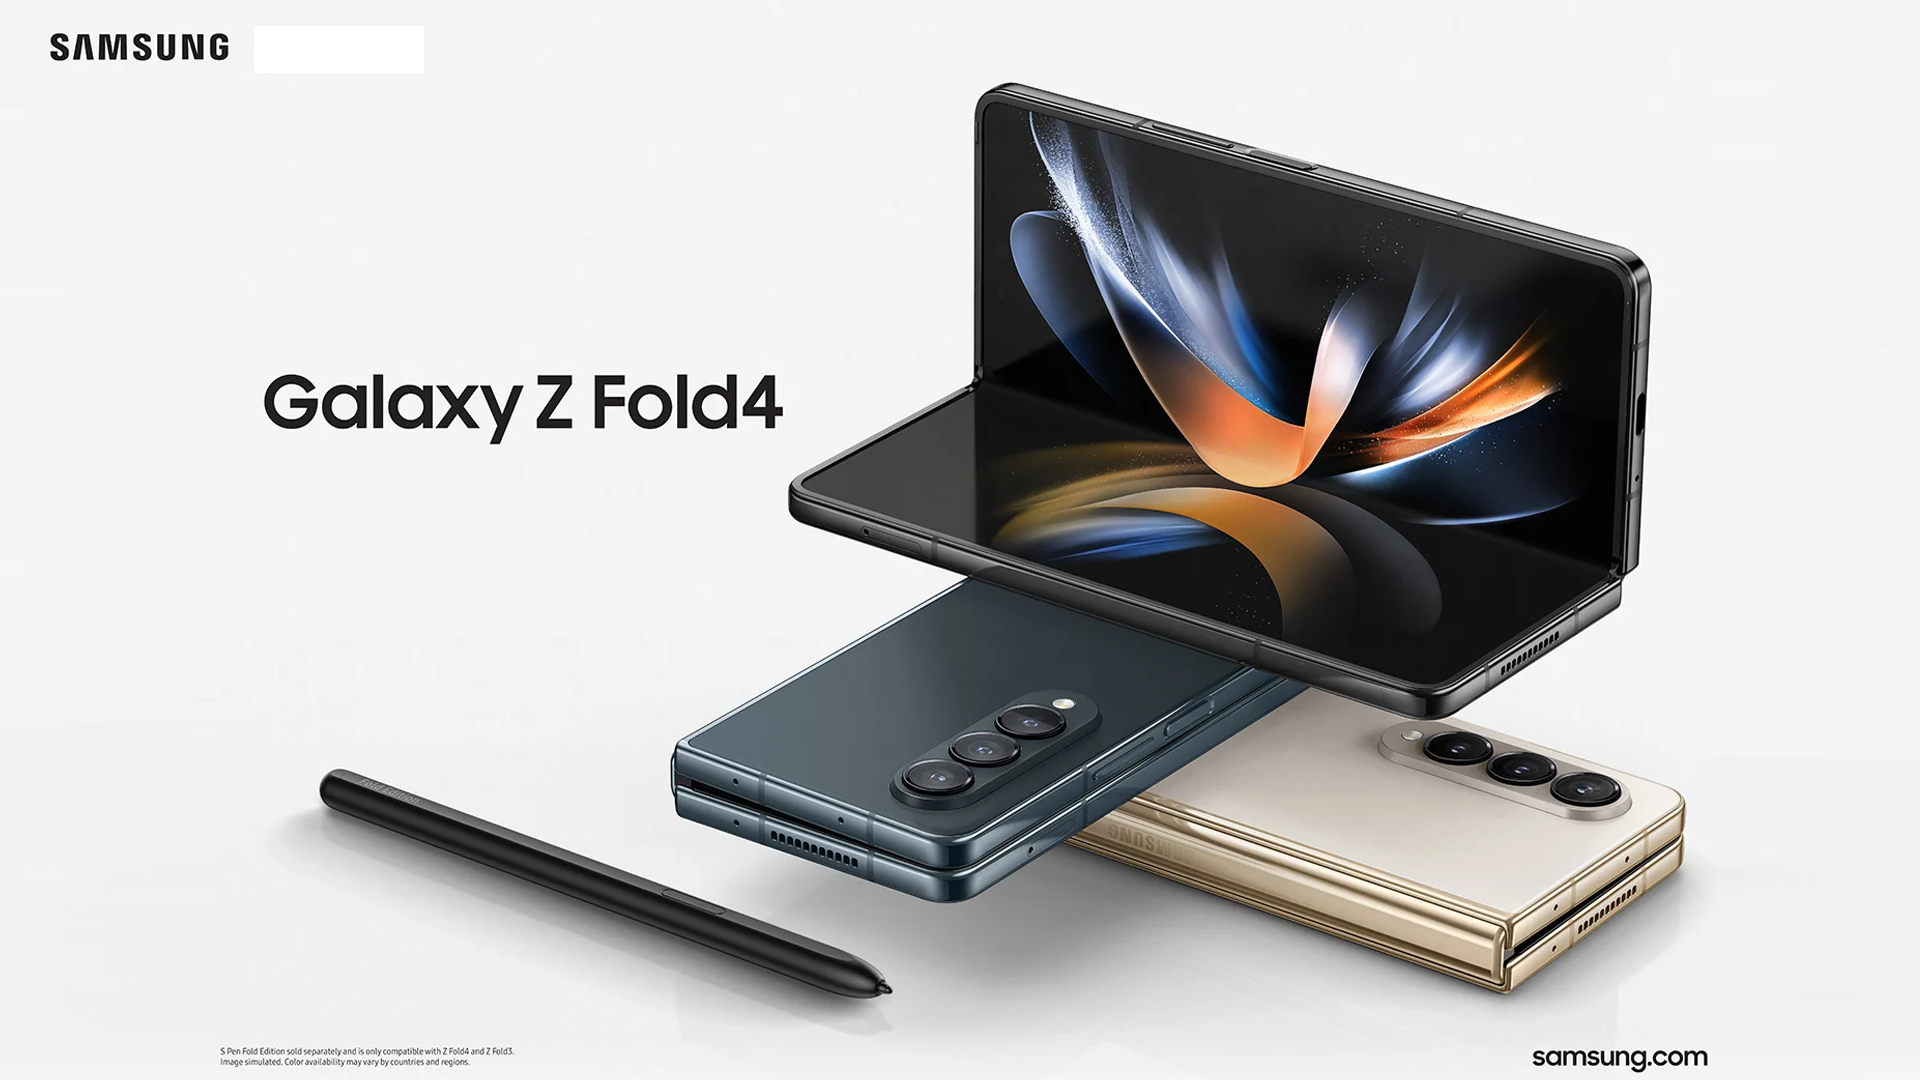 Samsung Galaxy Z Fold 4: The Foldable Phone That's Finally Mature